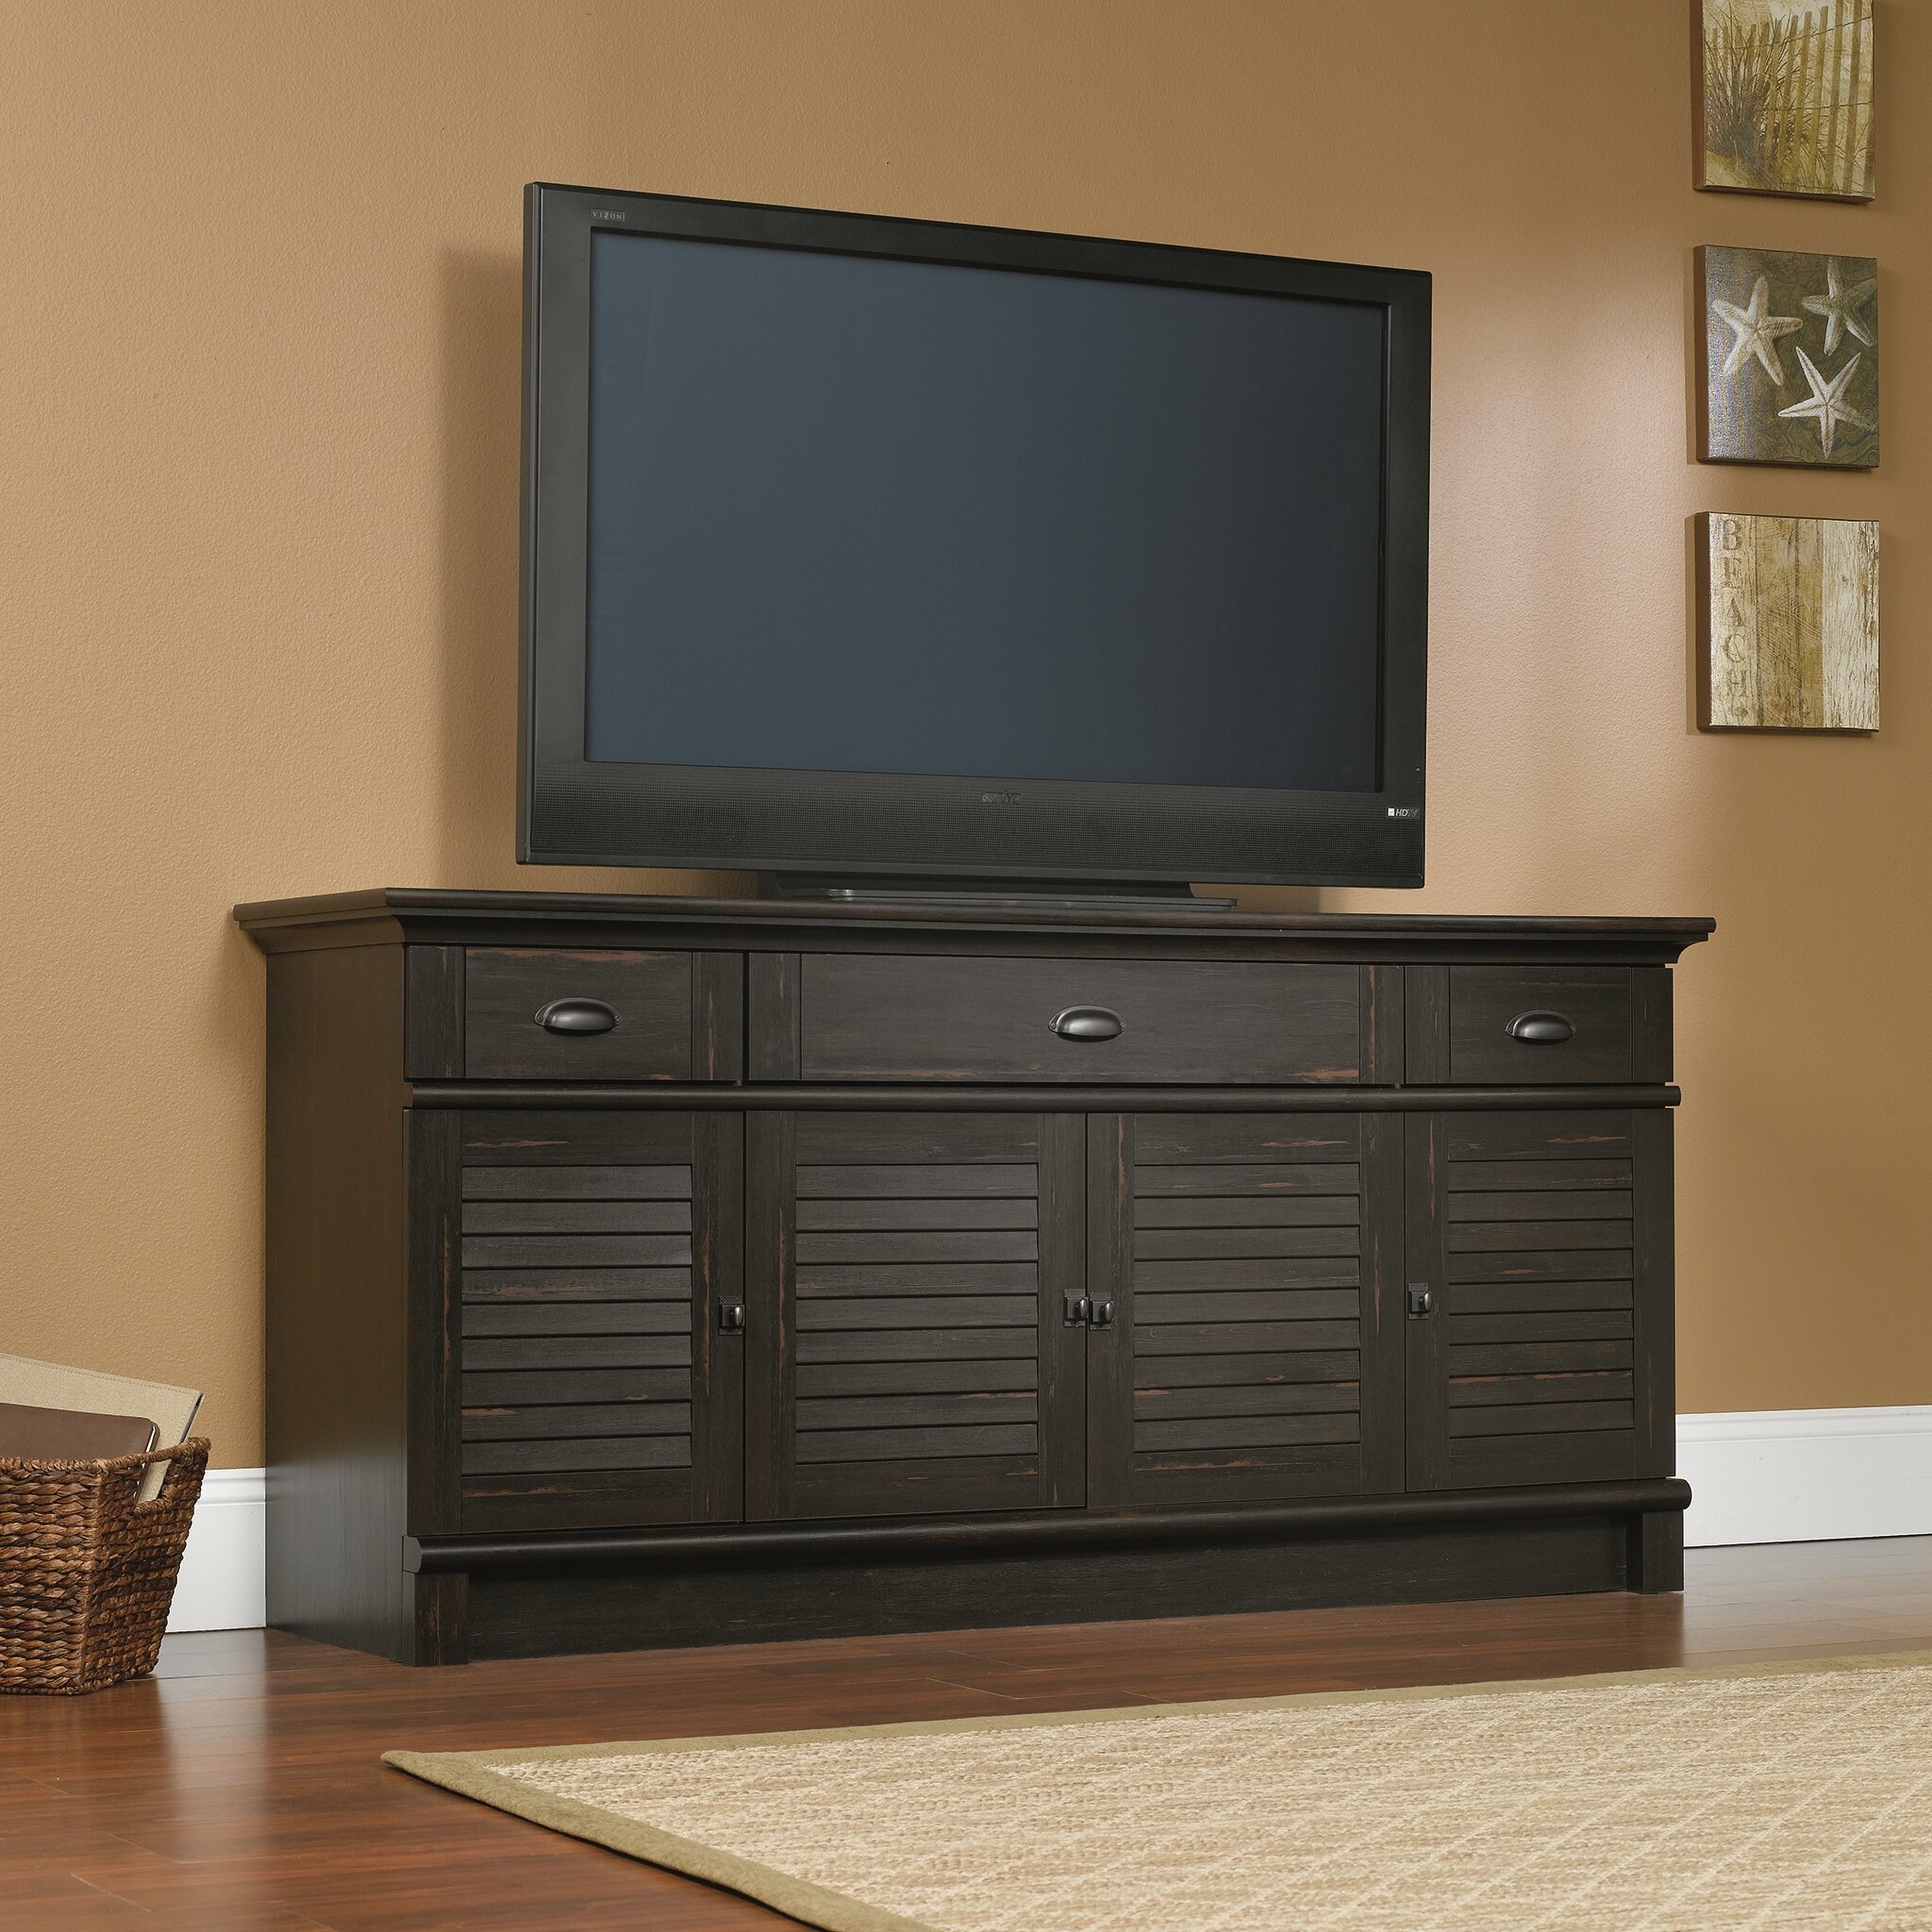 Beachcrest Home Pinellas Tv Stand For Tvs Up To 70 Reviews